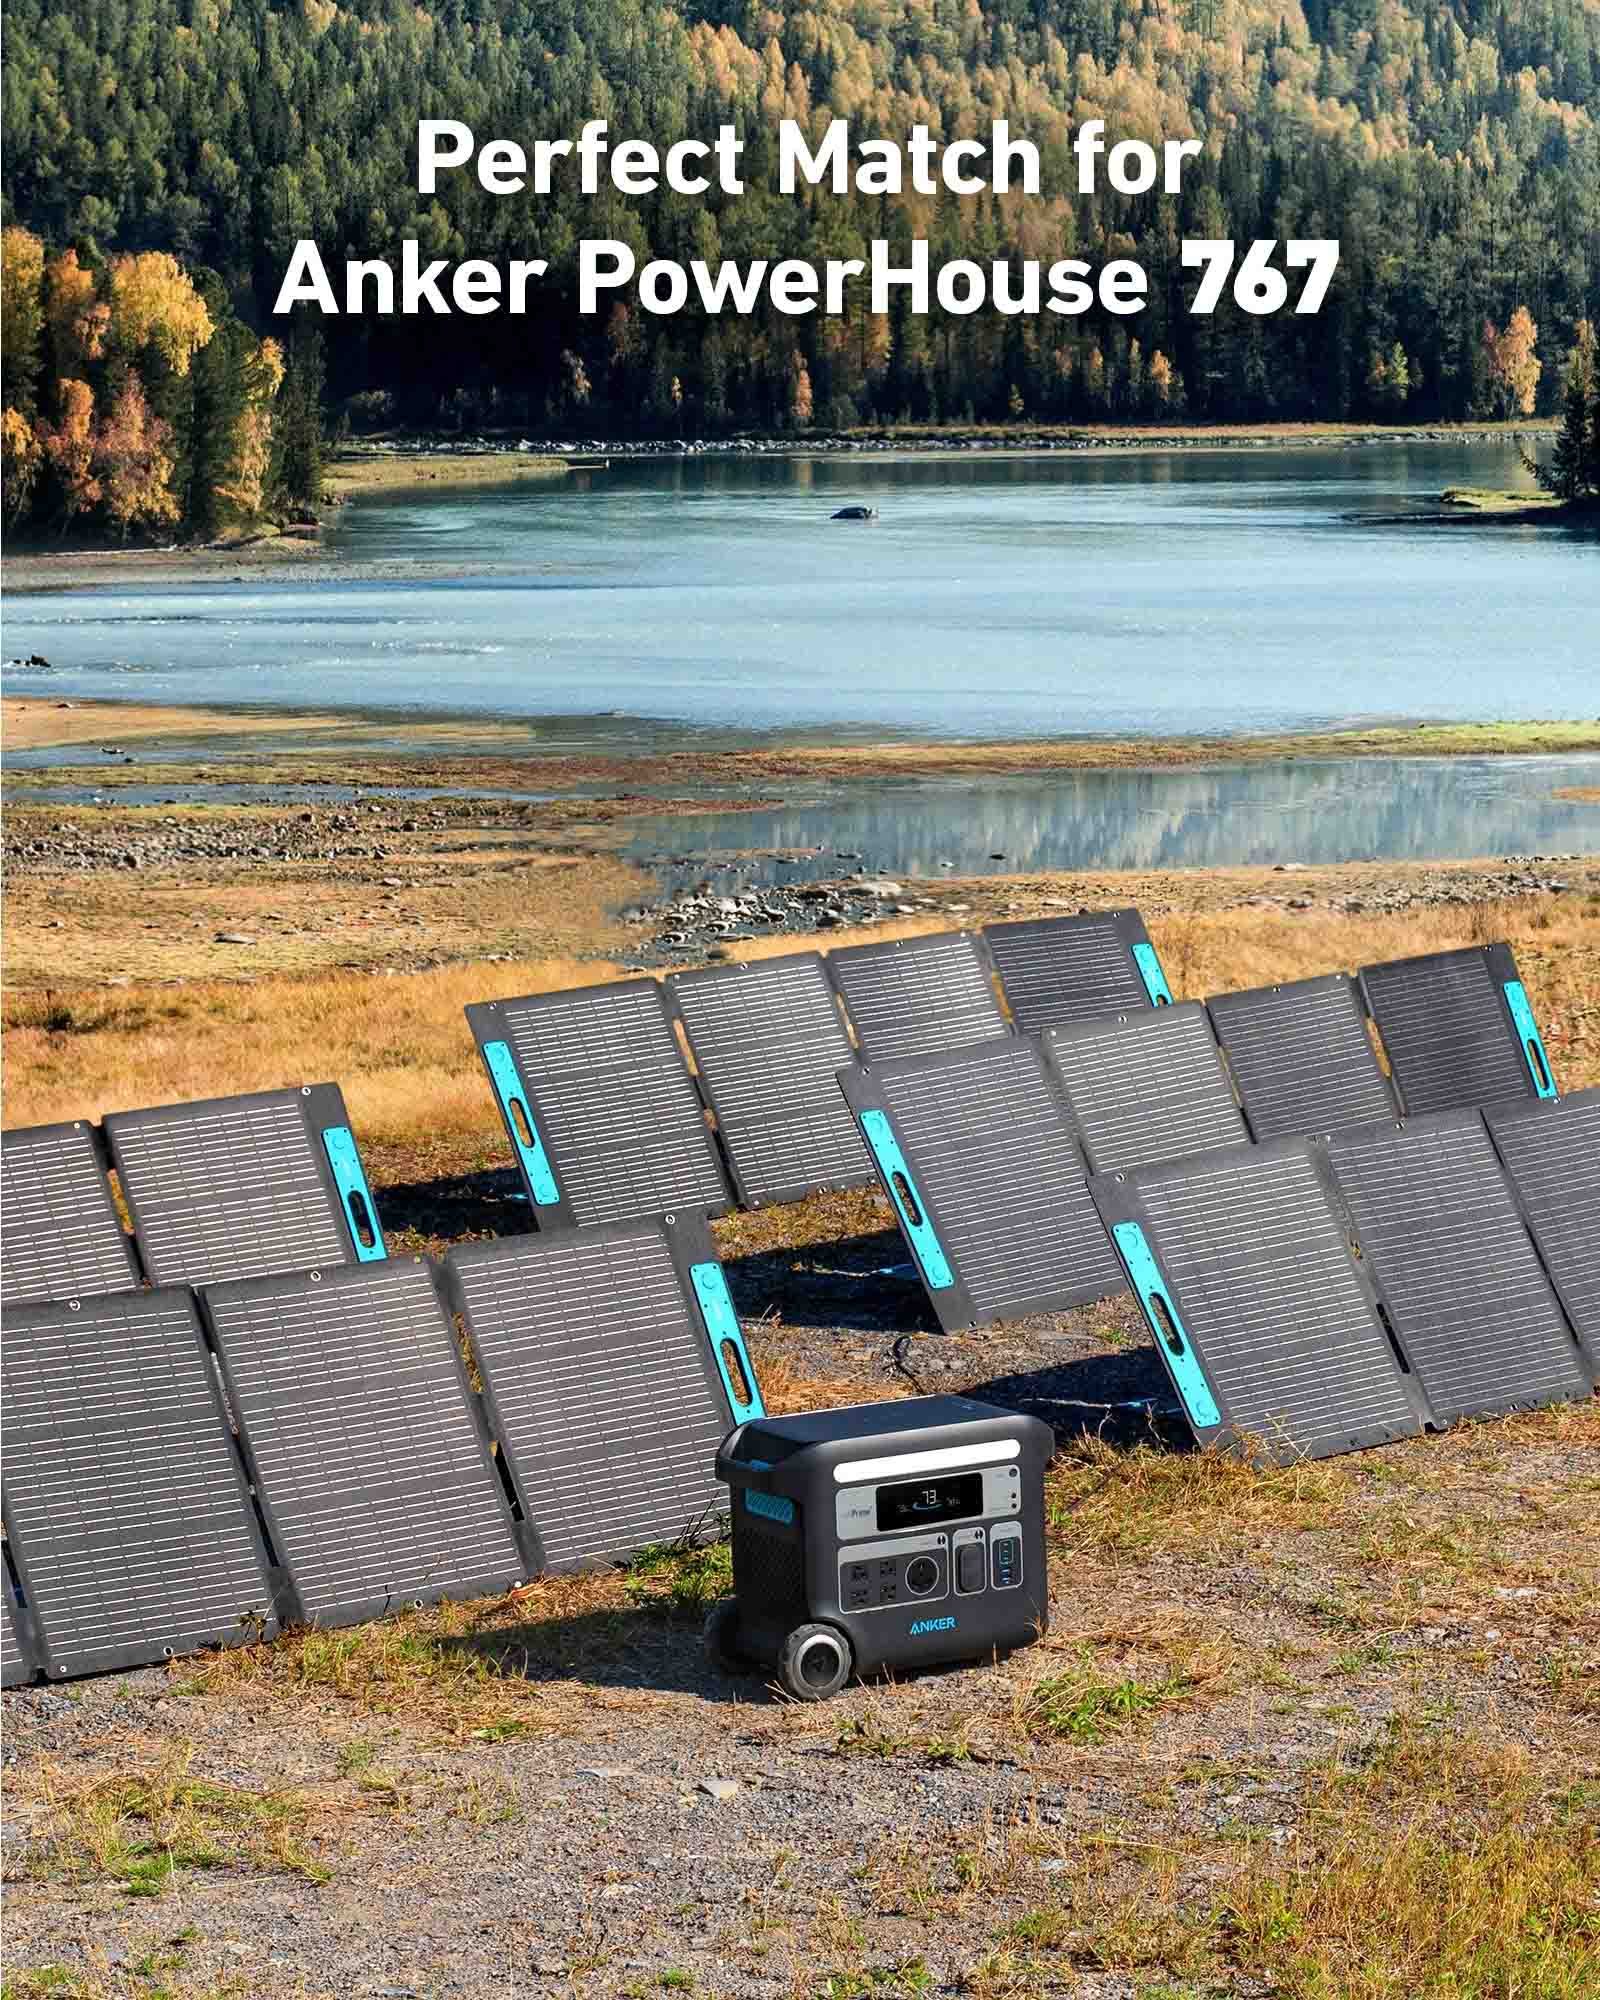 The Anker 521 200W Solar Panel Is A Perfect Match For The PowerHouse 767